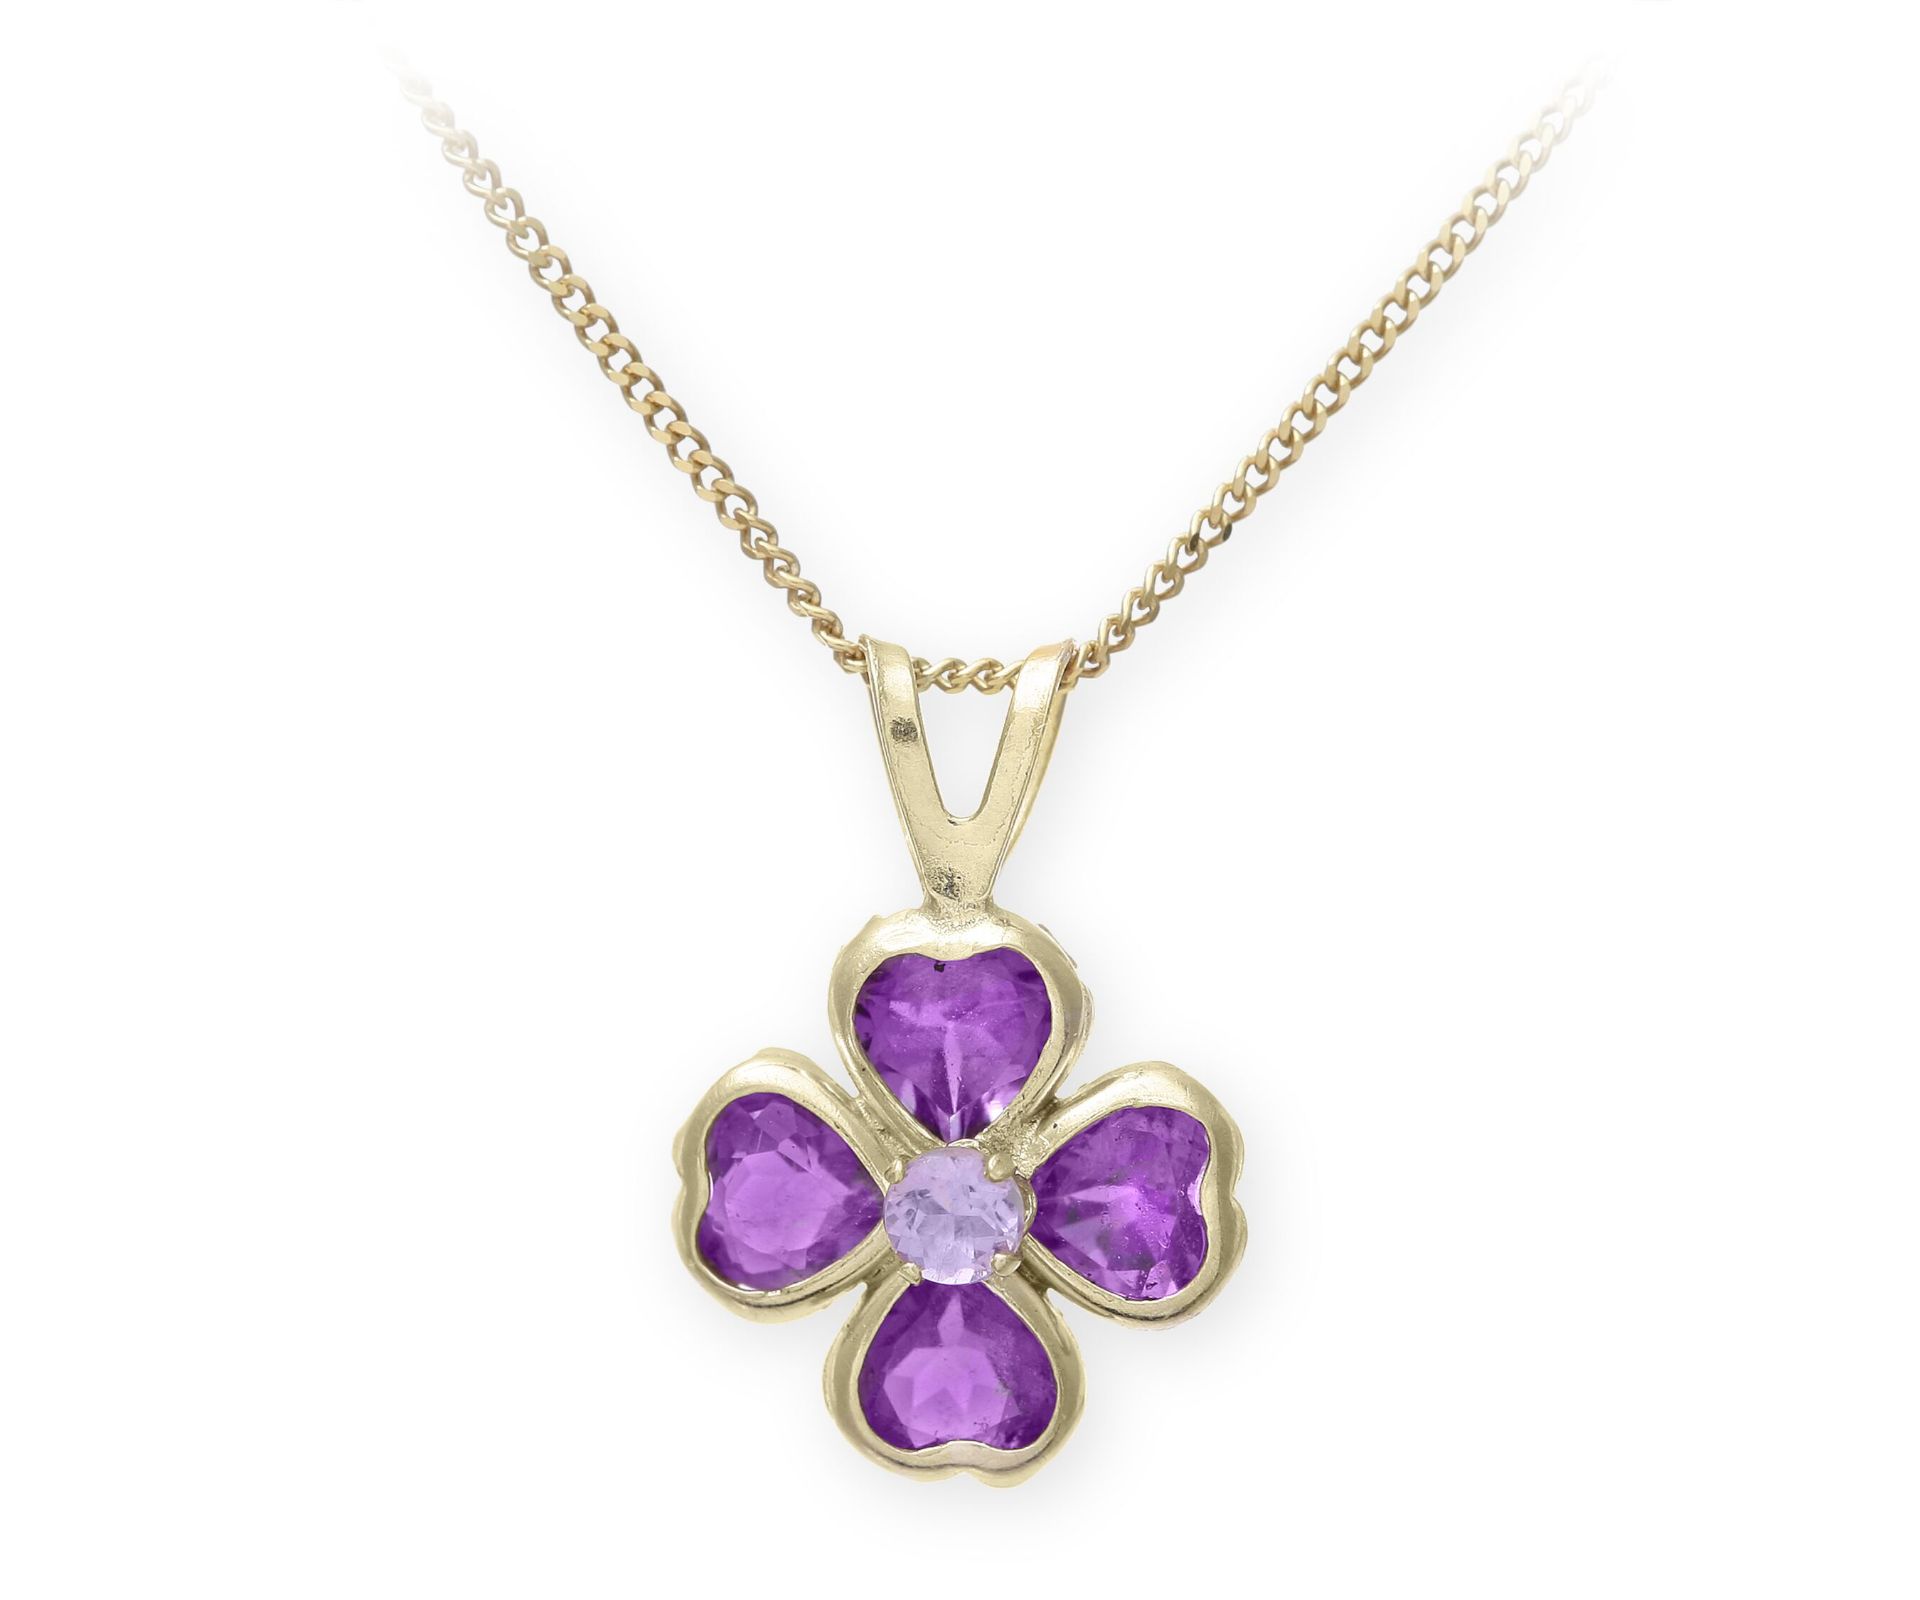 Large Amethyst Pendant Lucky Clover Design With 18" Gold Chain, Metal 9ct Yellow Gold, Weight (g)